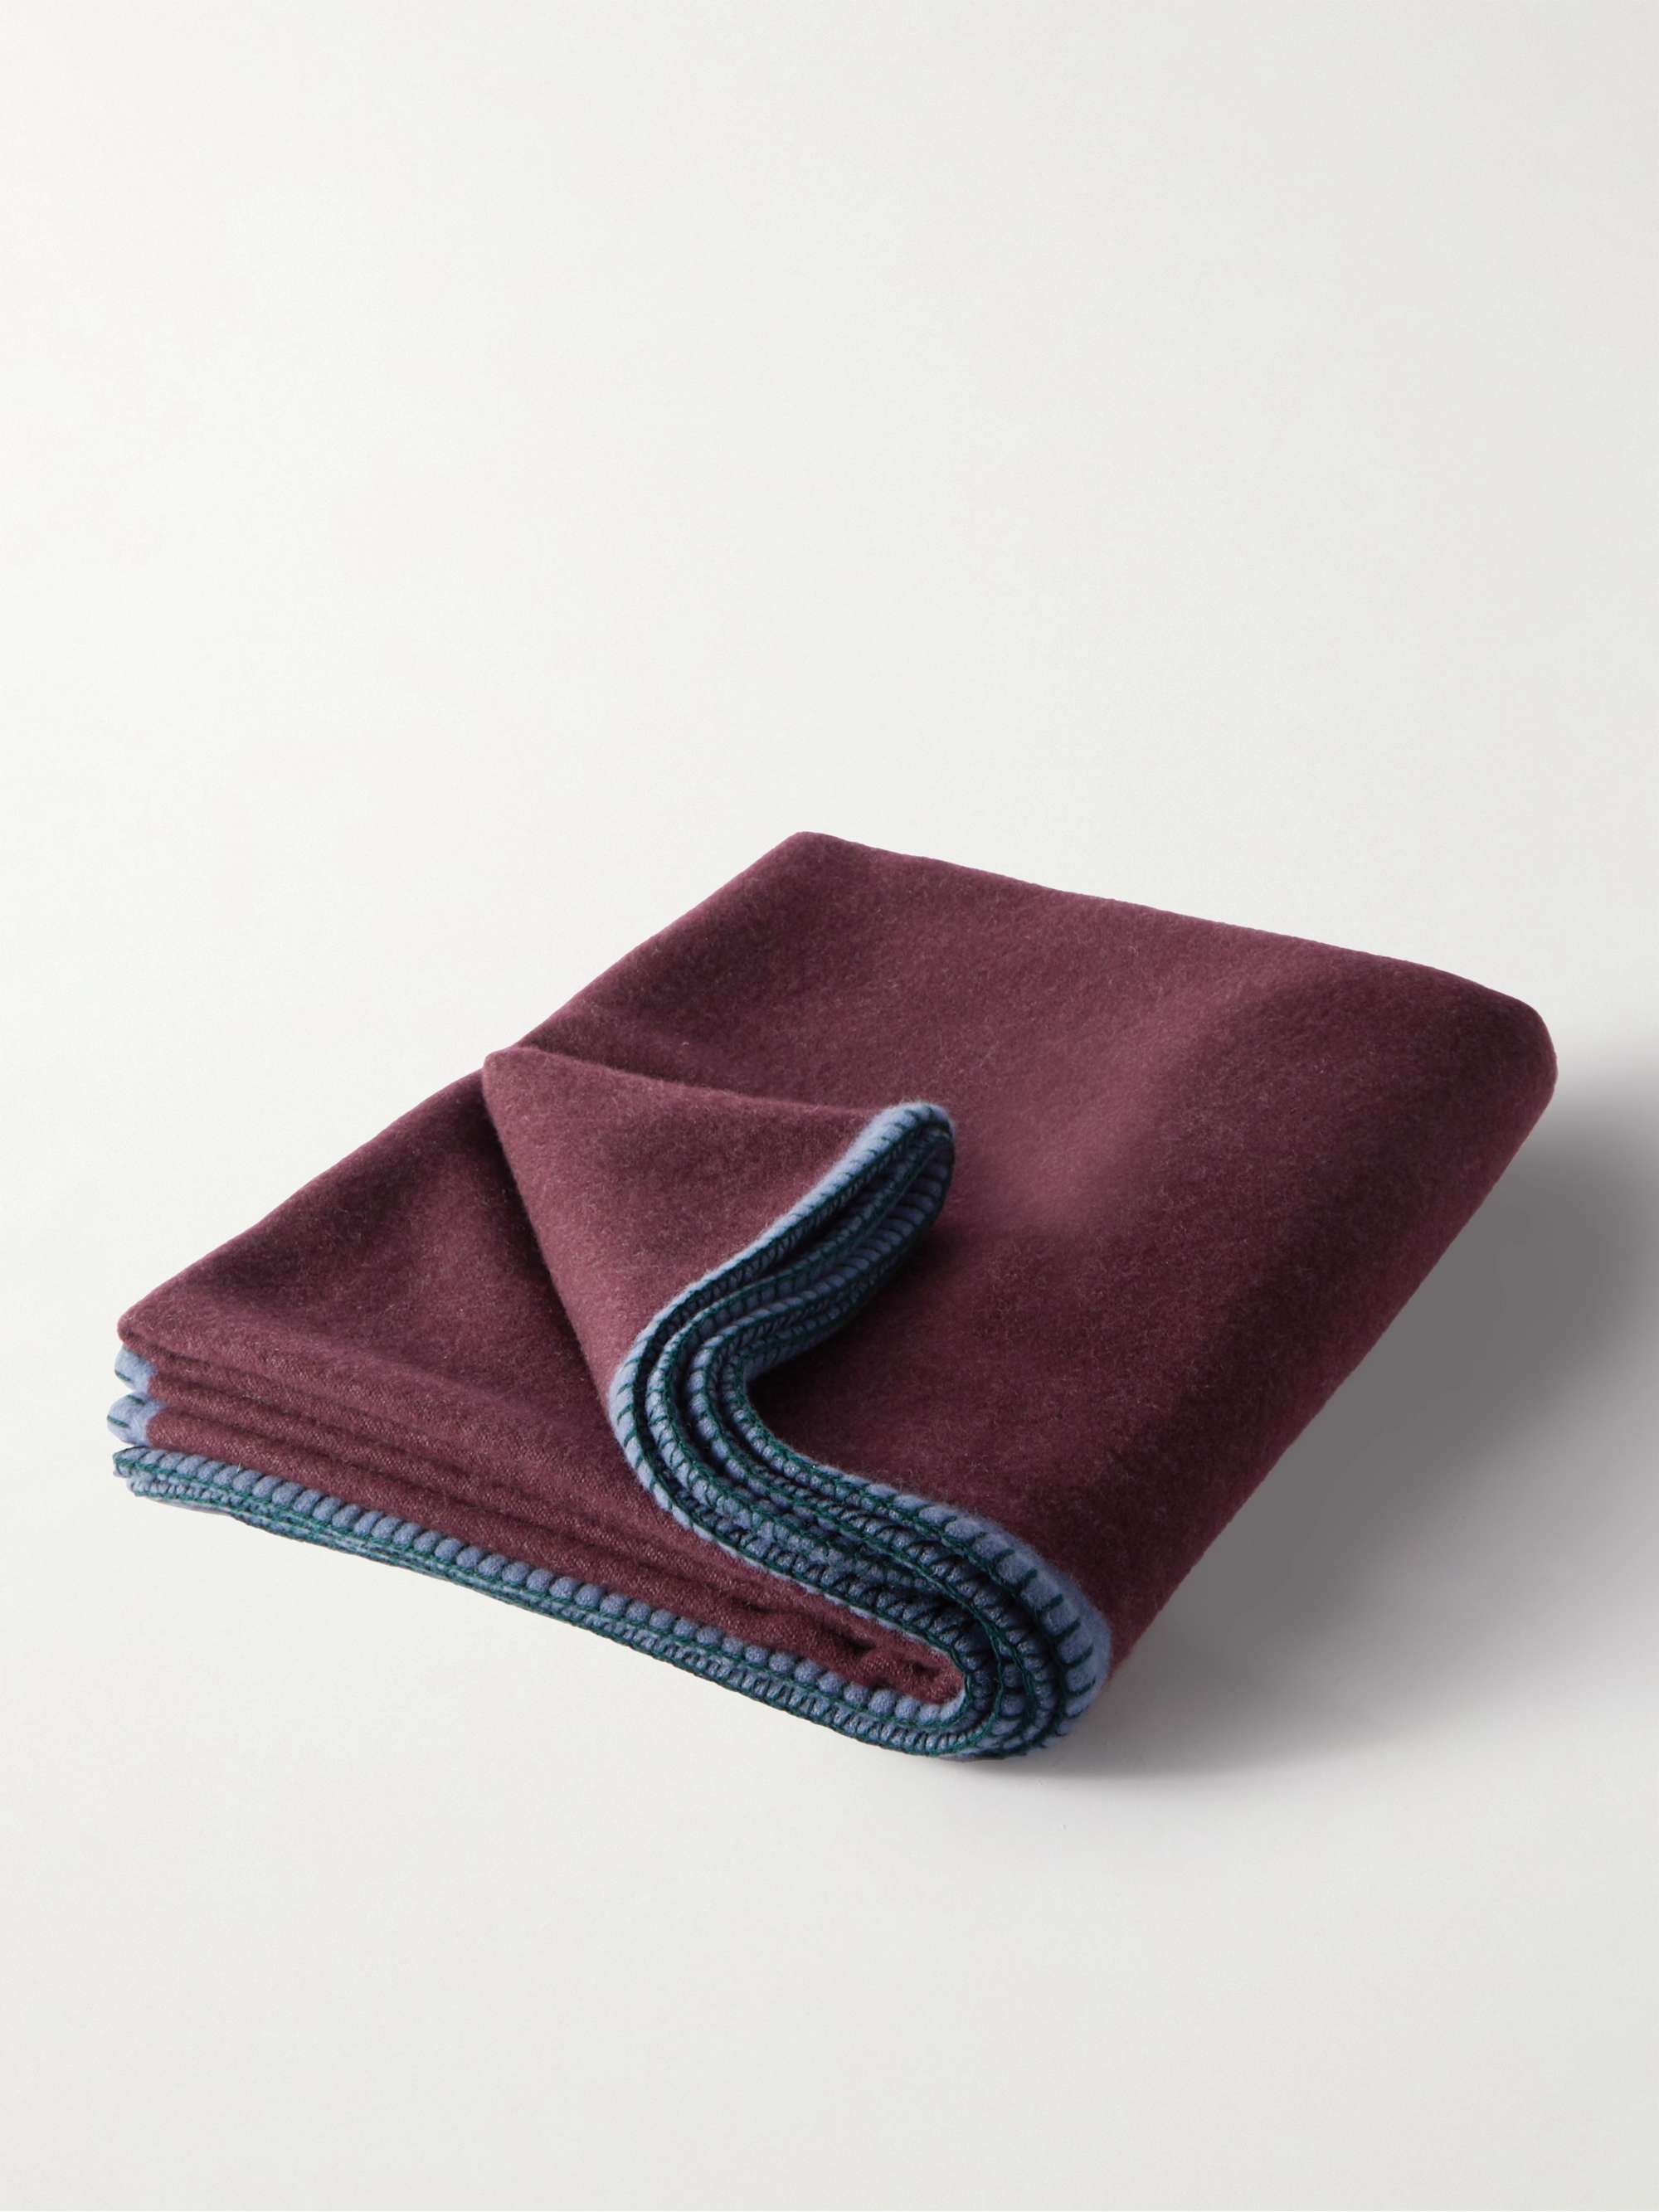 R+D.LAB Wool and Cashmere Blanket